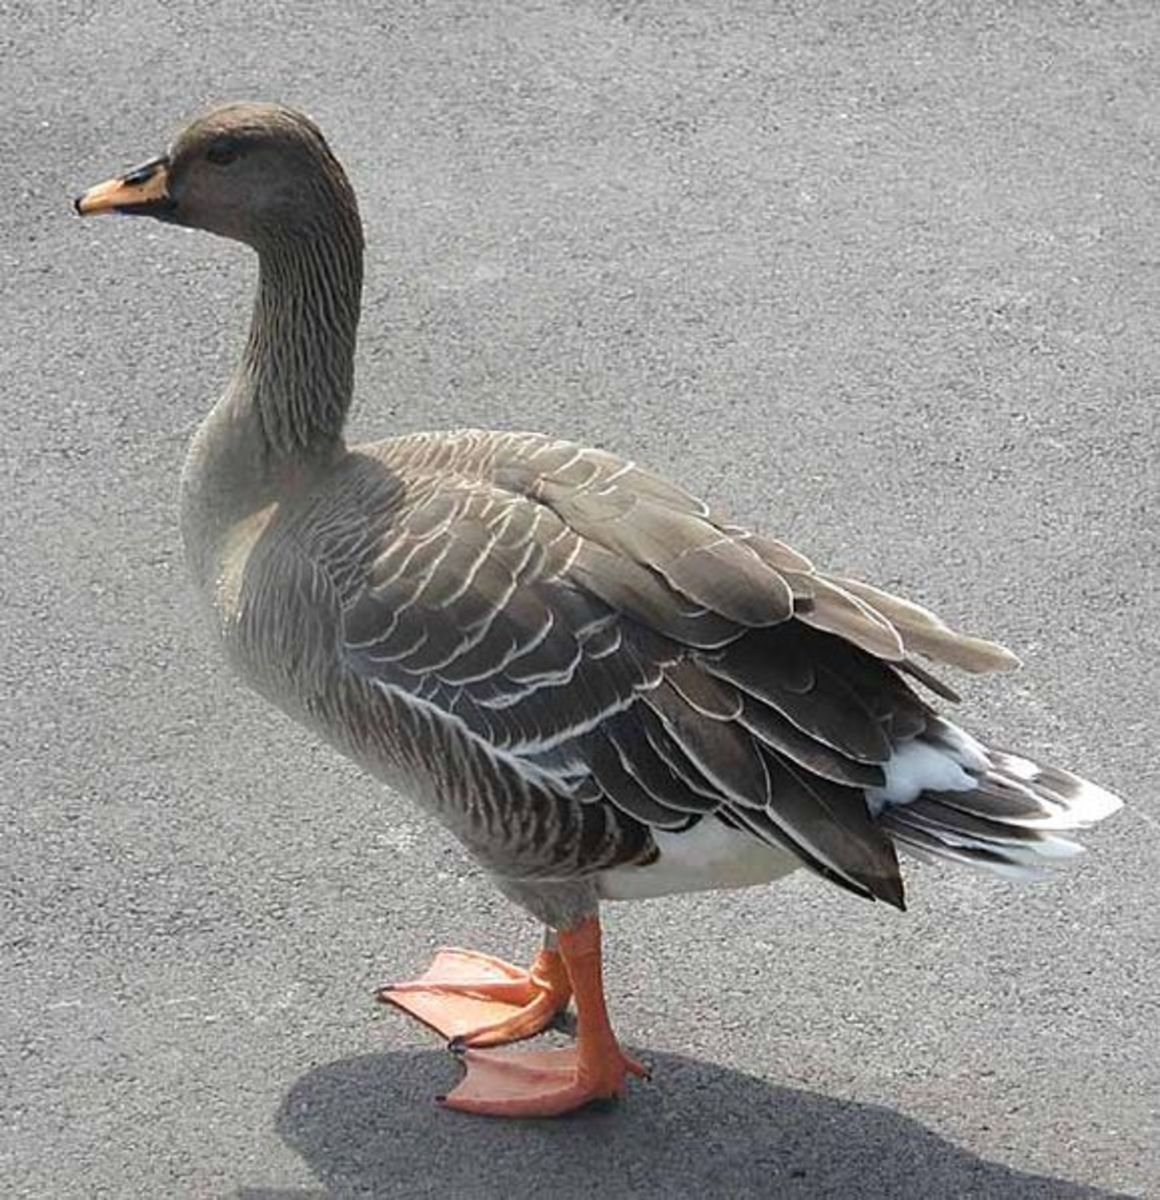 The adult bean goose is a large upstanding bird with mottled dark brown plumage, a long neck and head and yellow-orange legs and feet. The bill is usually yellow and black.